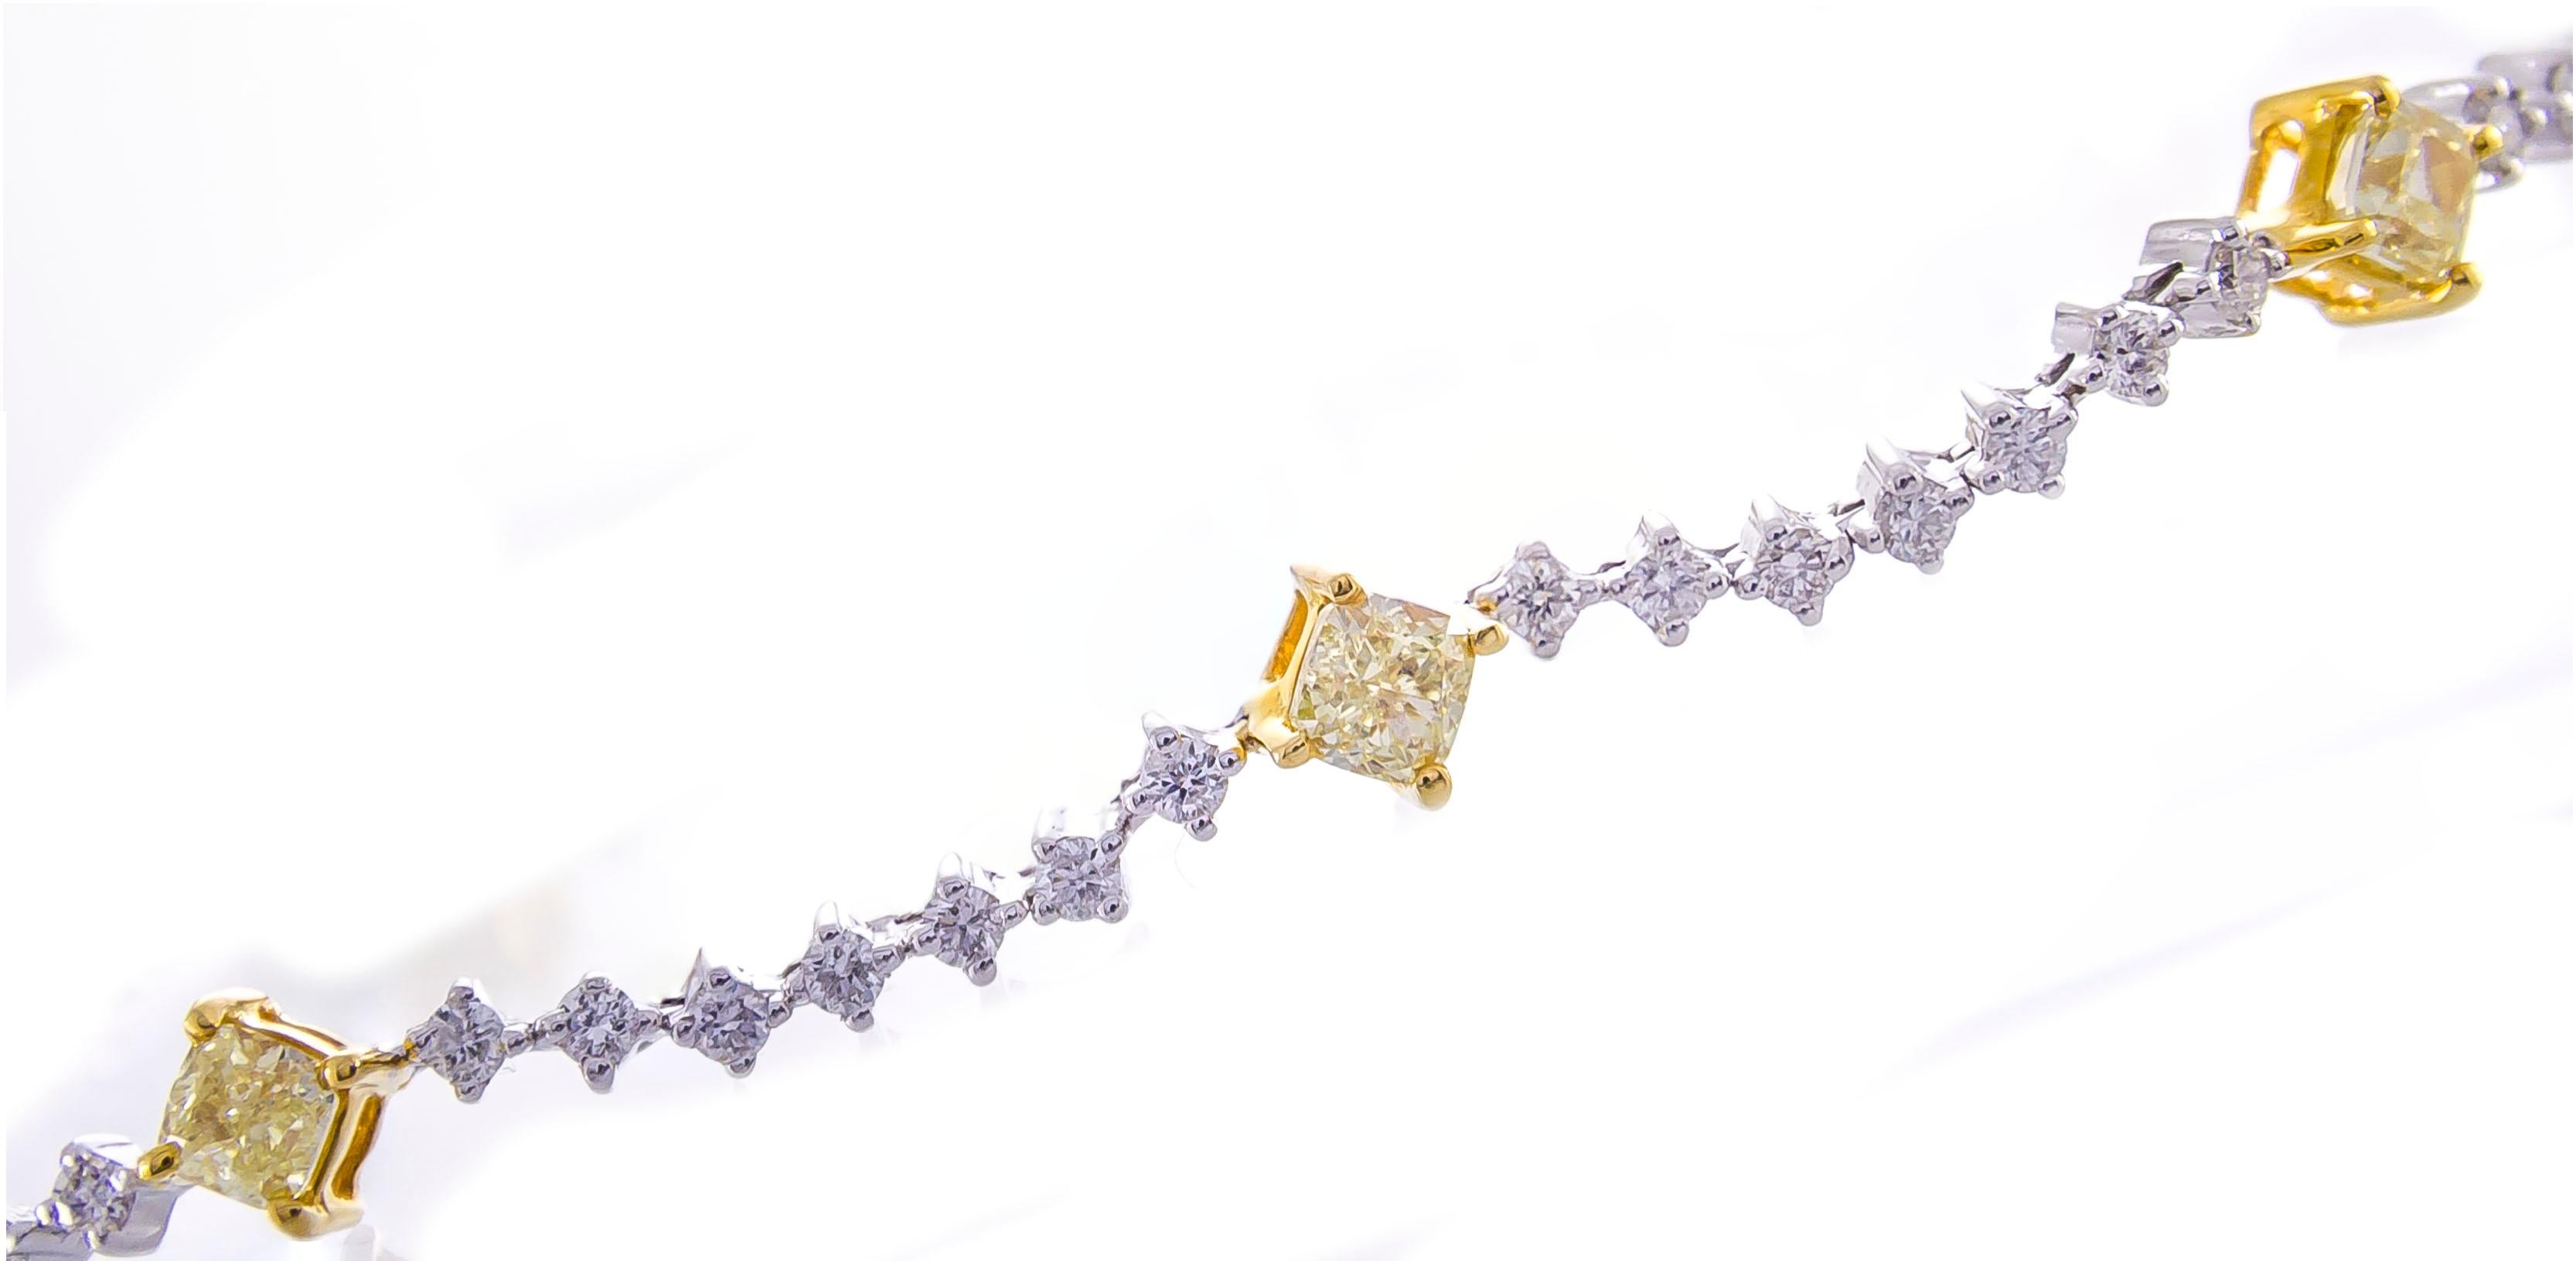 This beautiful bracelet is crafted in 14-karat Two Tone Gold. It features 8 glistening cushion cut yellow Diamonds 2.11 Carat - SI quality, connected by 56 white Round Diamonds 1.20 Carat GH-SI quality. This bracelet is 7.5